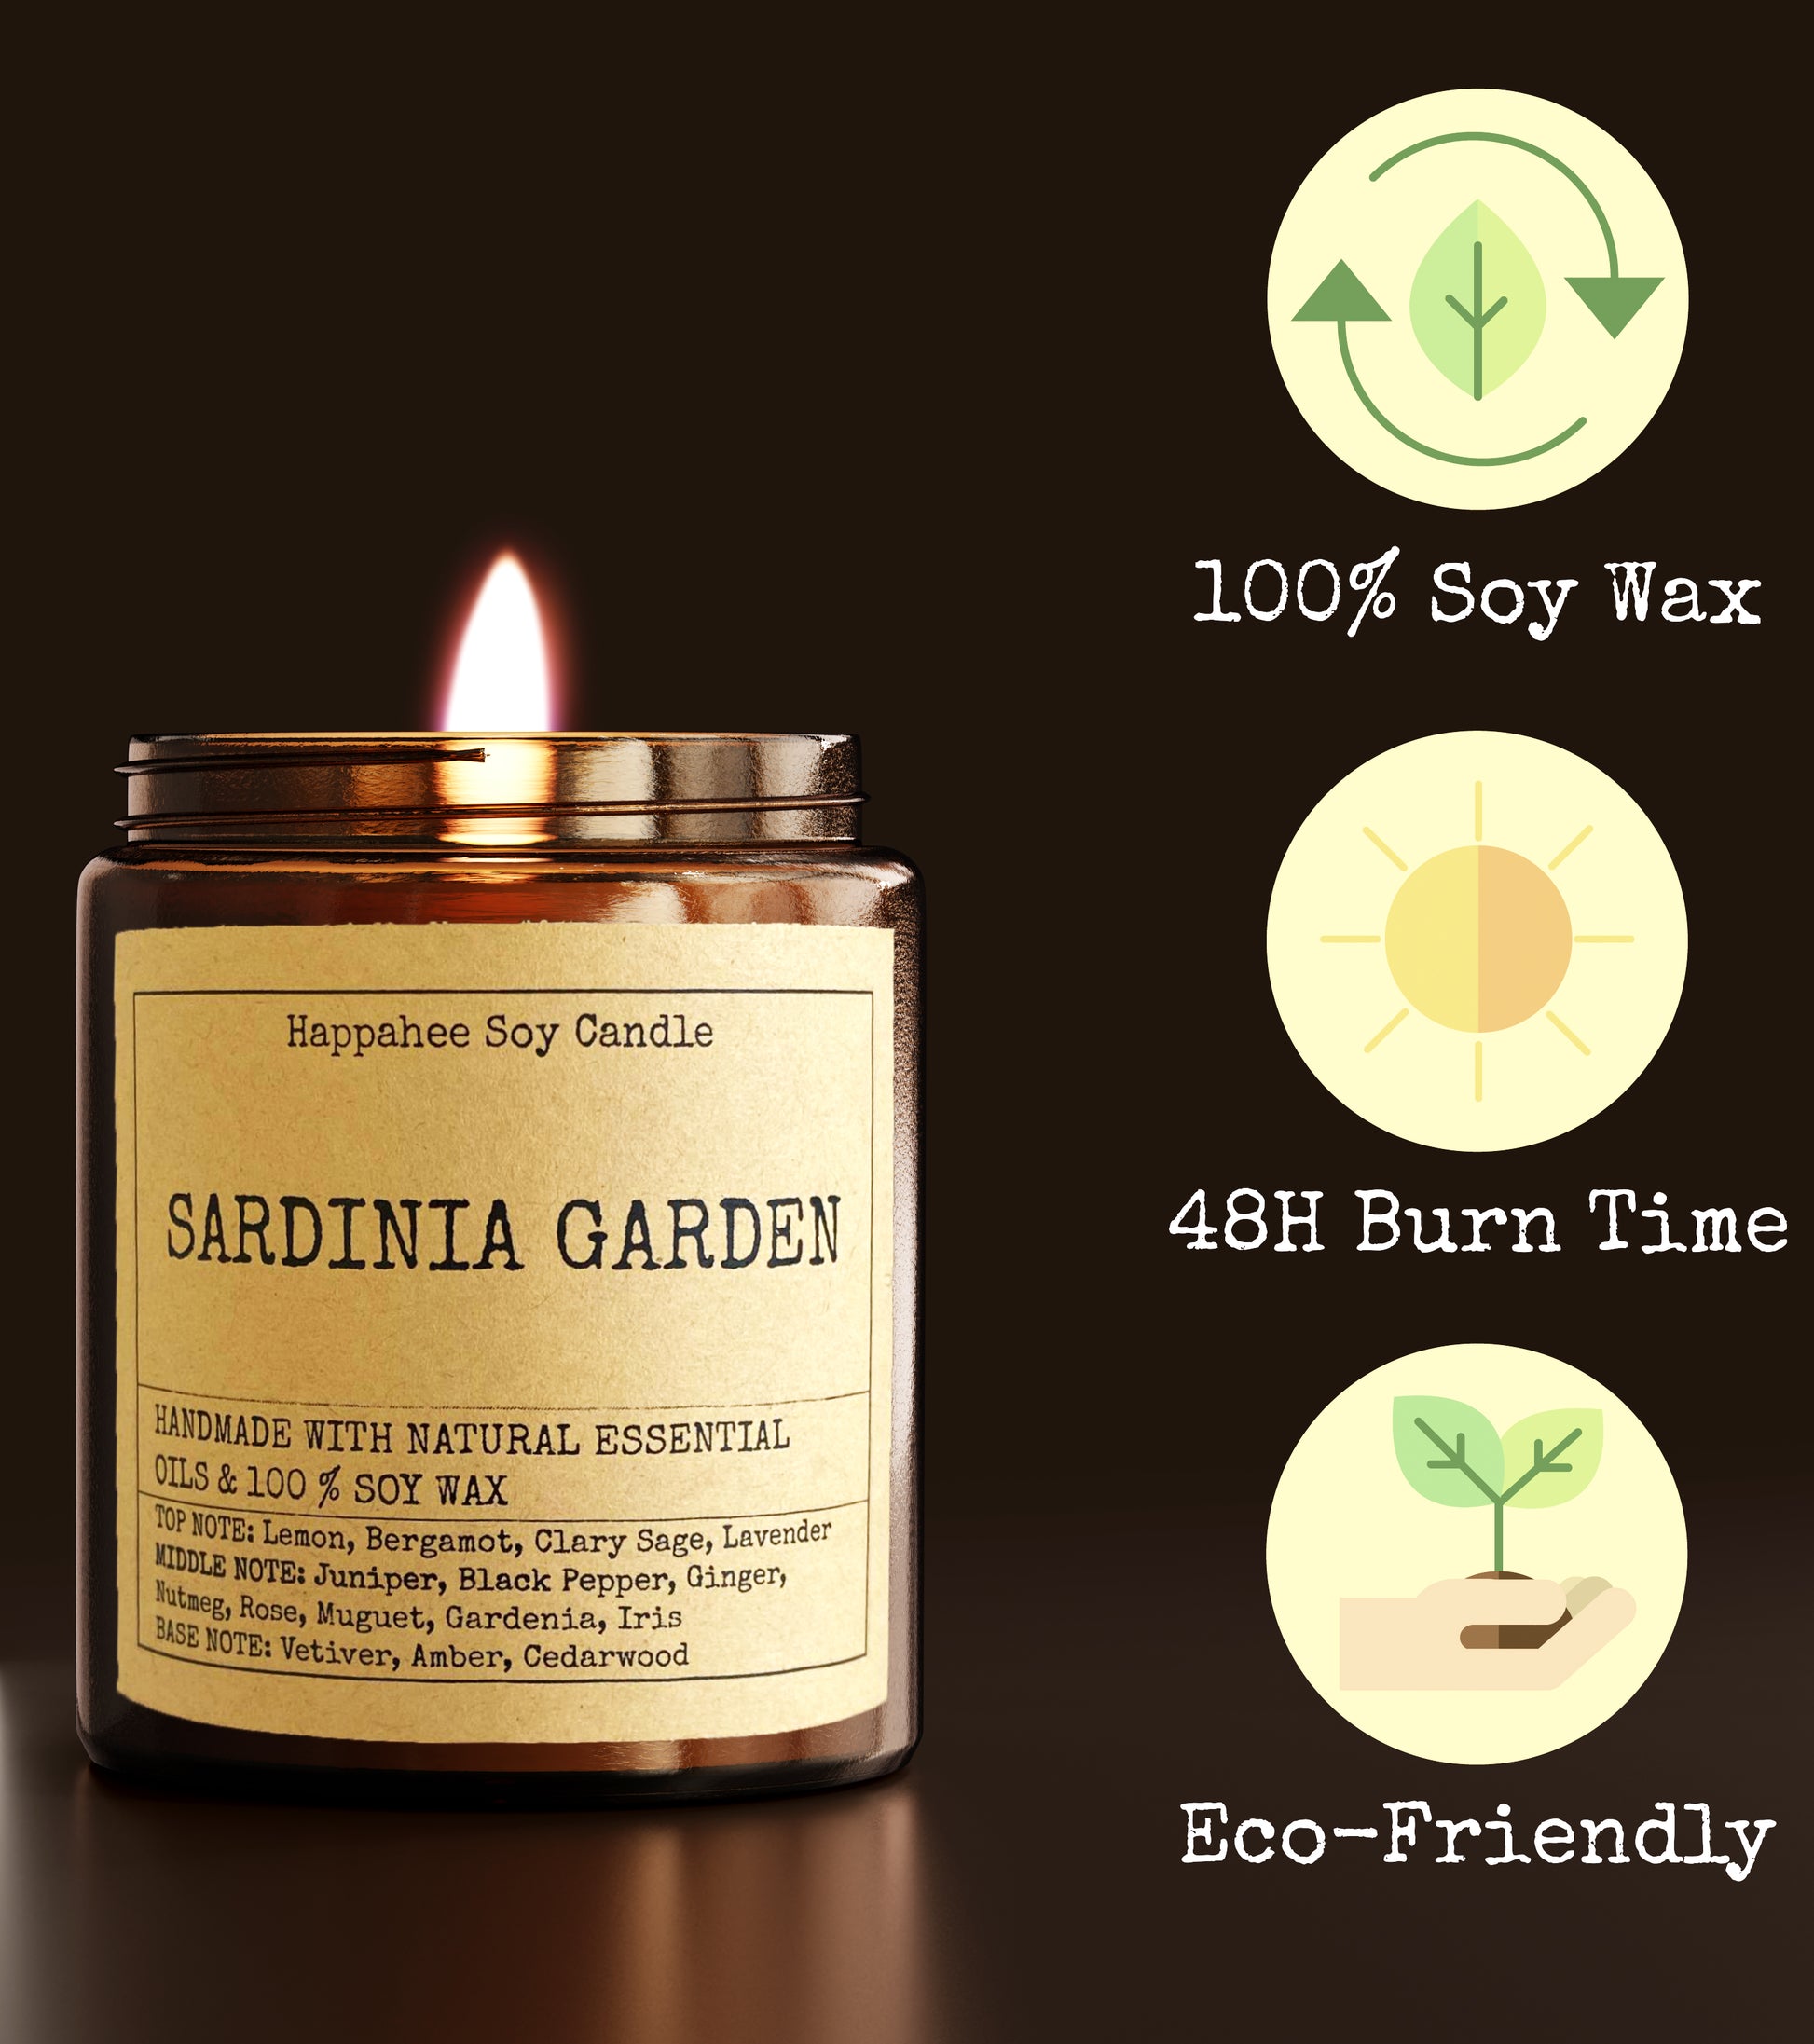 Made from renewable and biodegradable soy wax with natural fragrances derived from essential oils or botanical extracts.